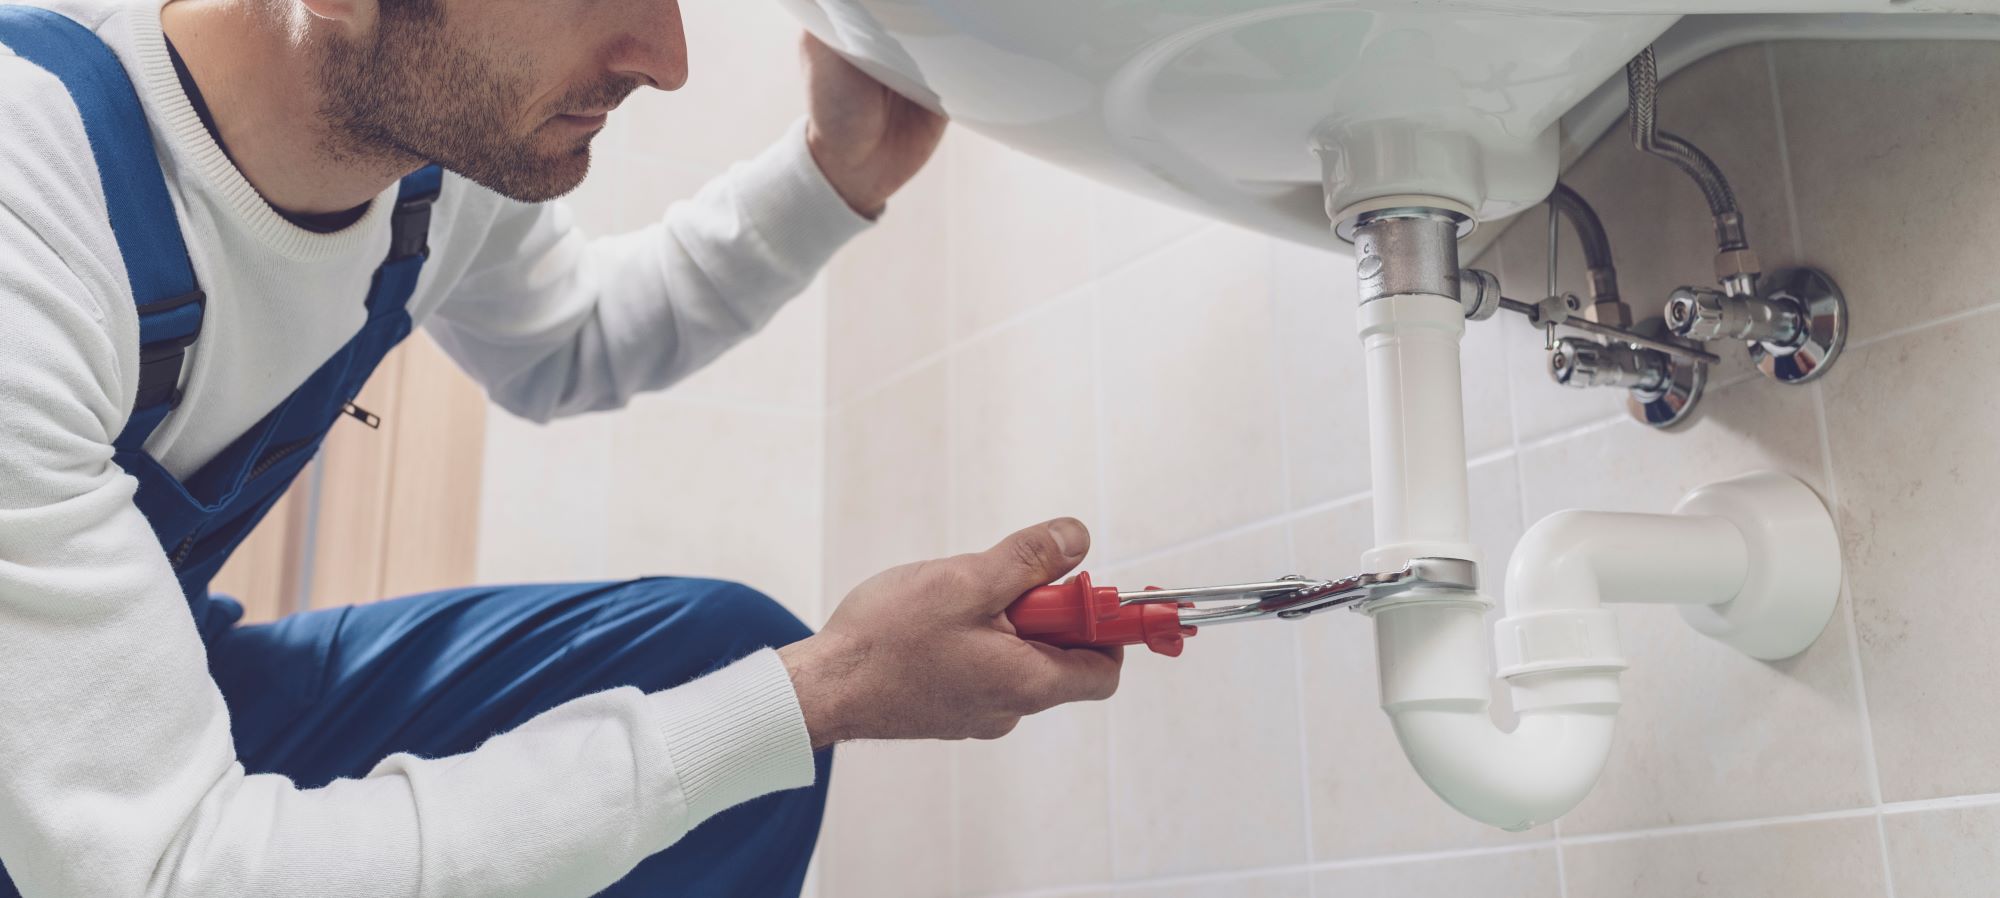 Four Reasons To Hire A Licensed Plumbing Contractor